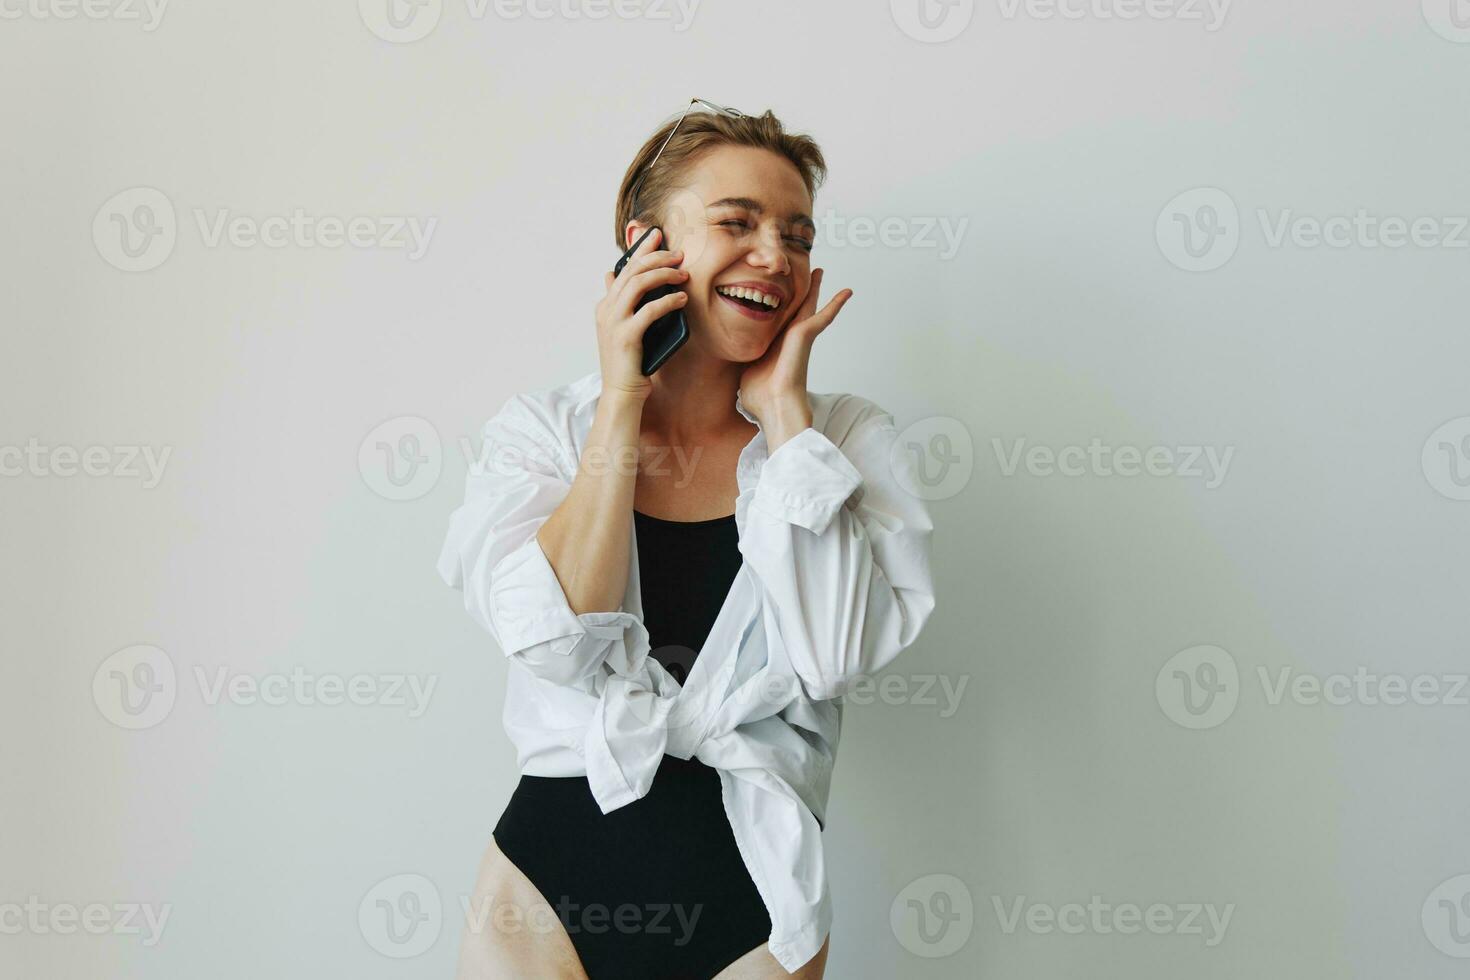 Teenage girl smiling and laughing talking on the phone, video call, chatting online photo